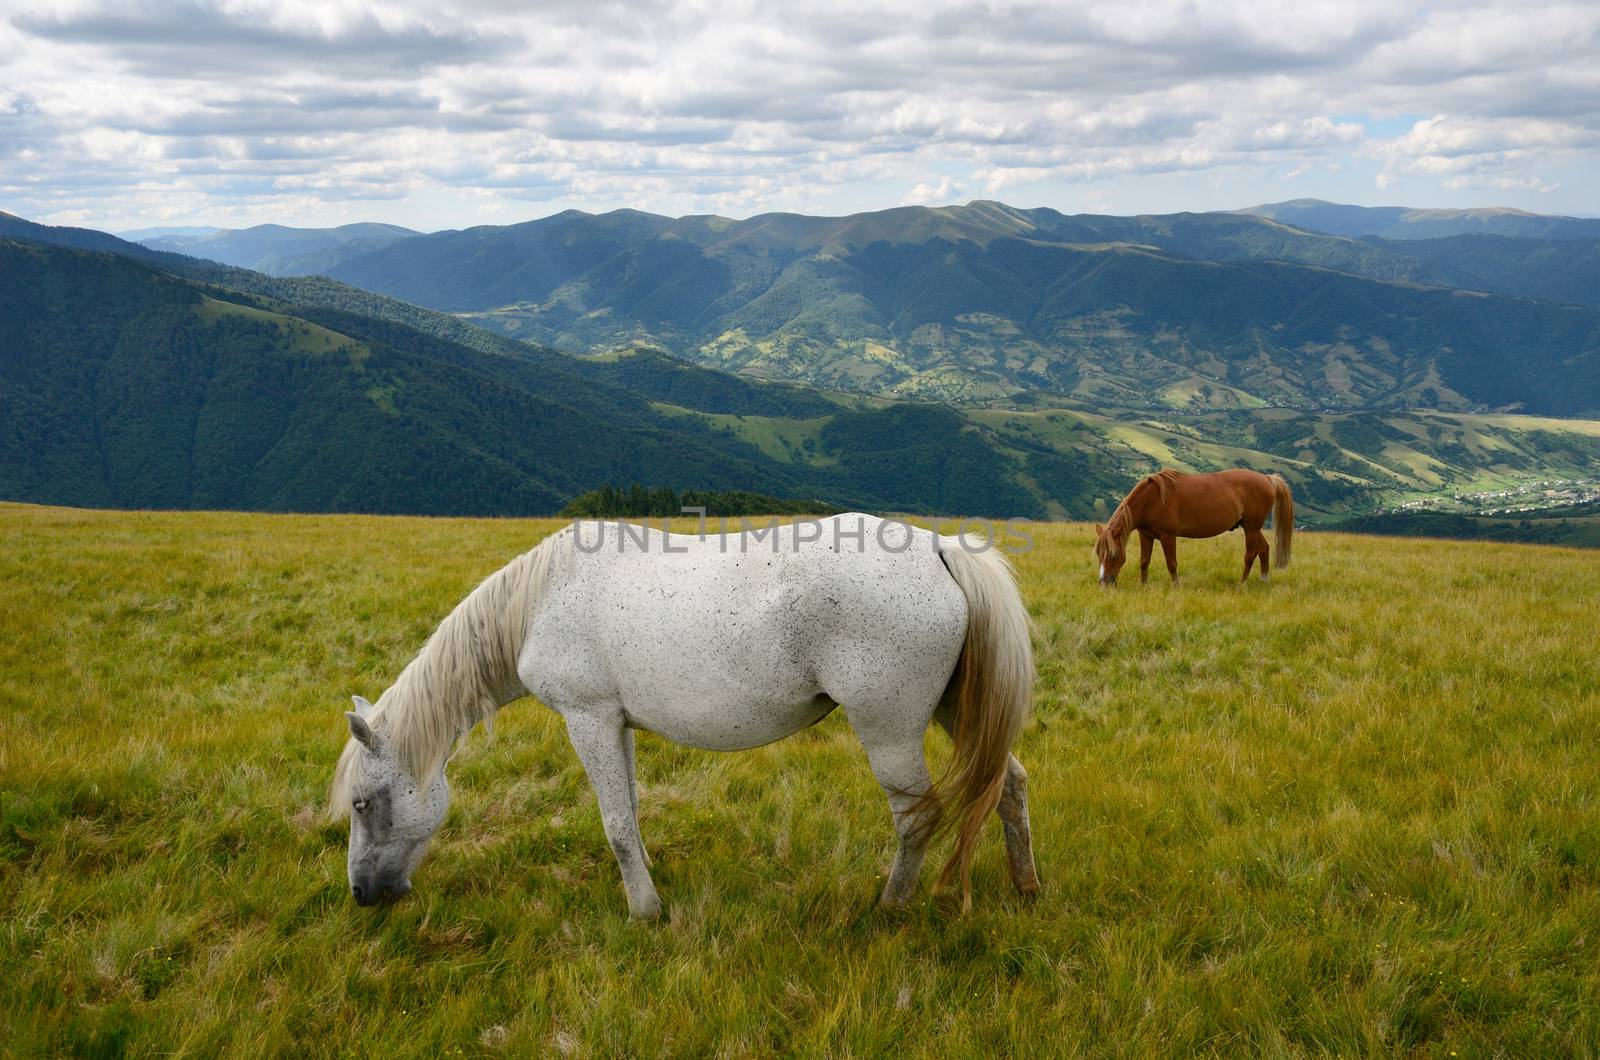 Yin yang black and white horses  feeding on the mountain pasture with mountains in background